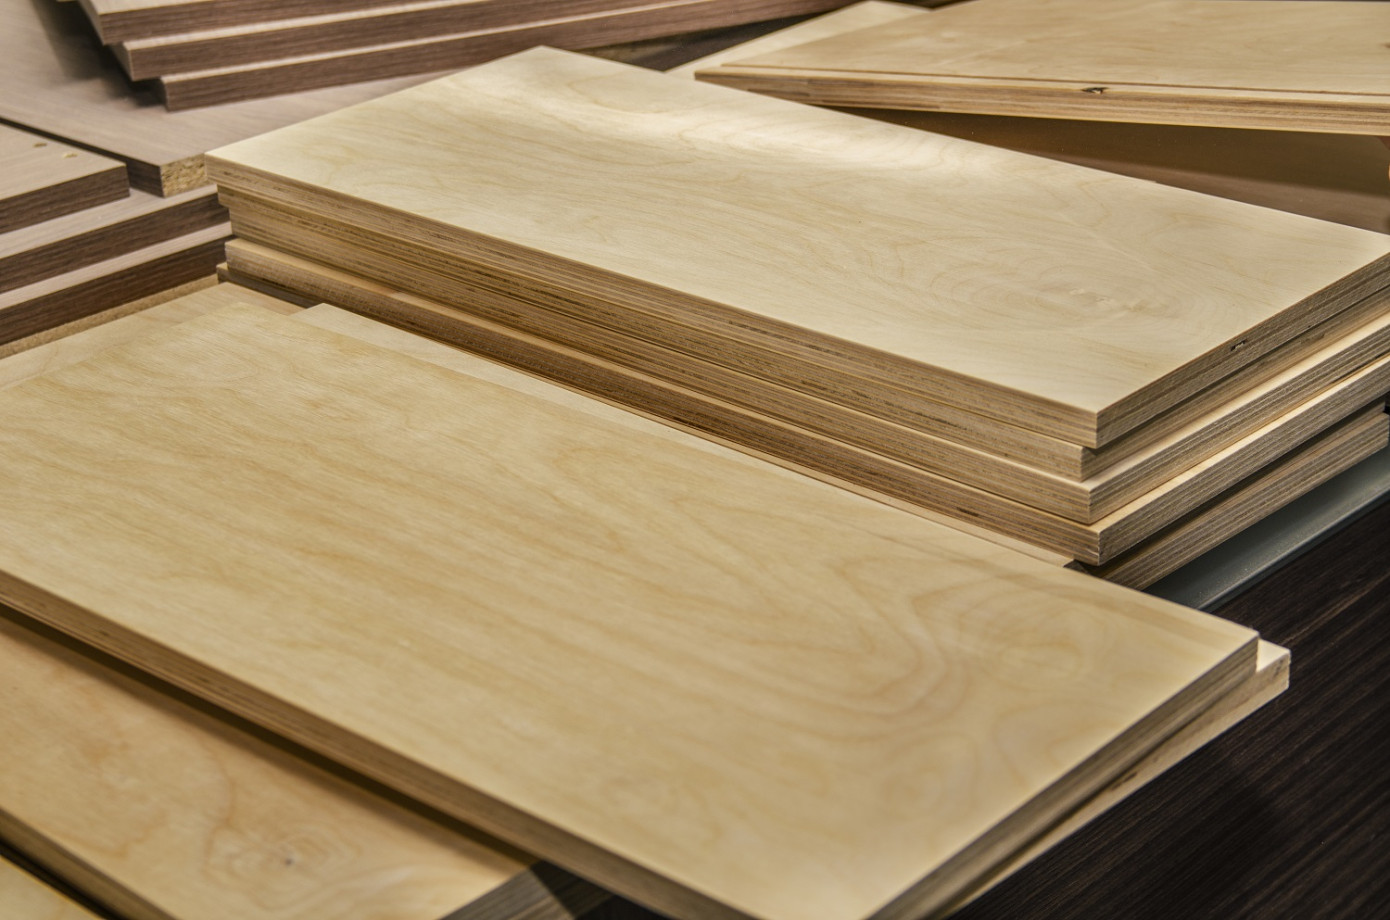 Exports of plywood from Russia to China jump 165% in February